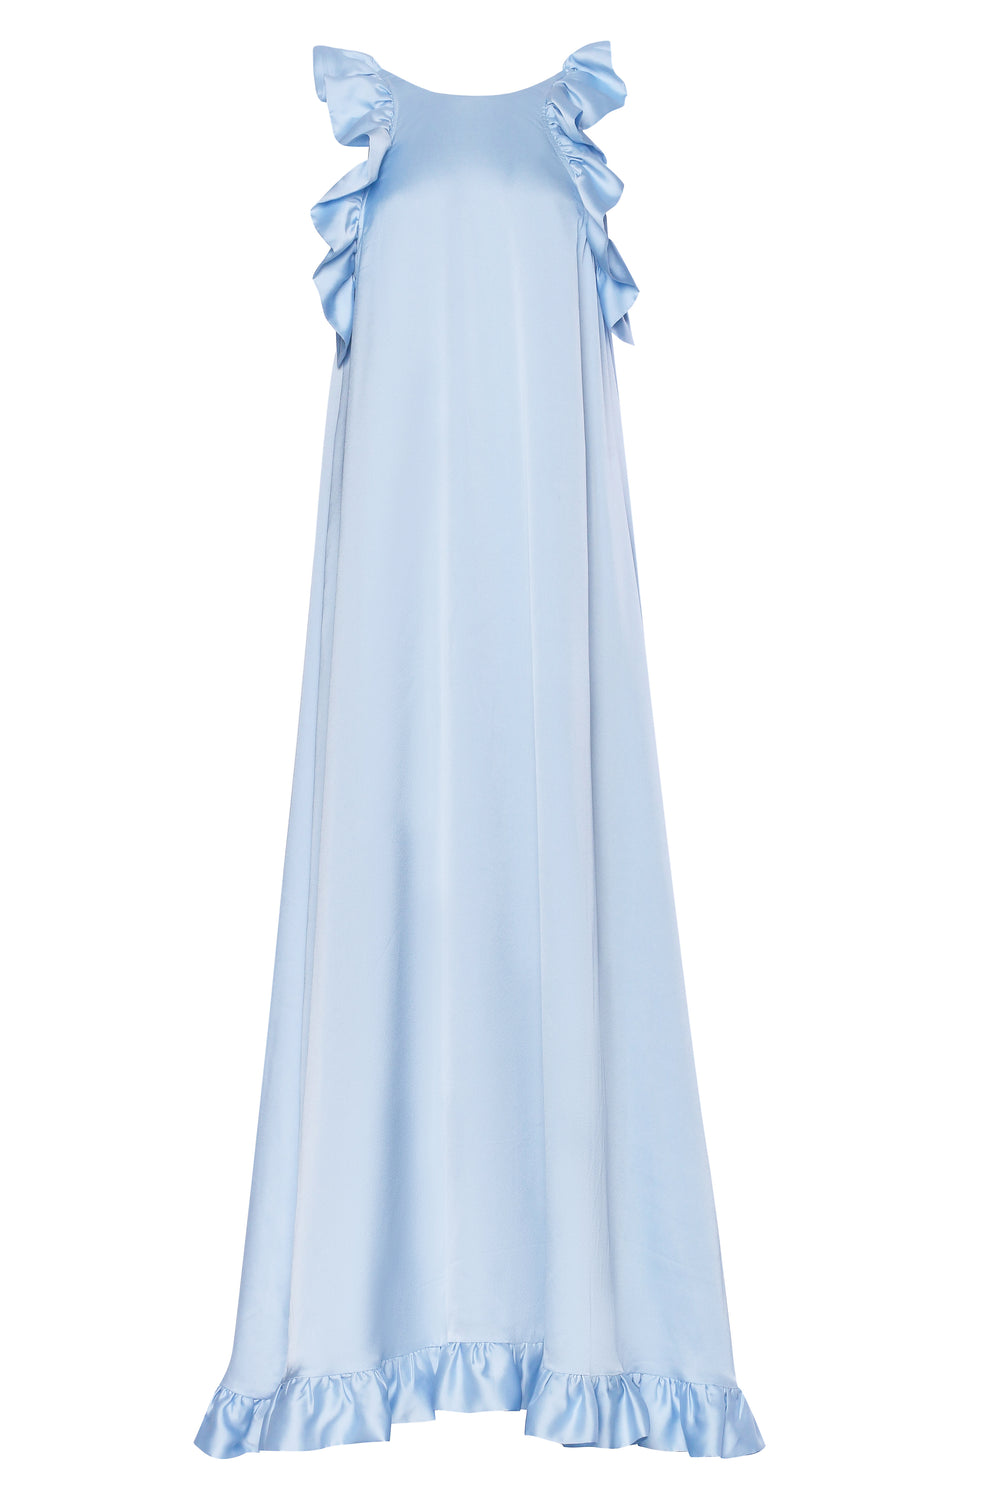 The Romance Gown - Baby Blue | Maison Amory